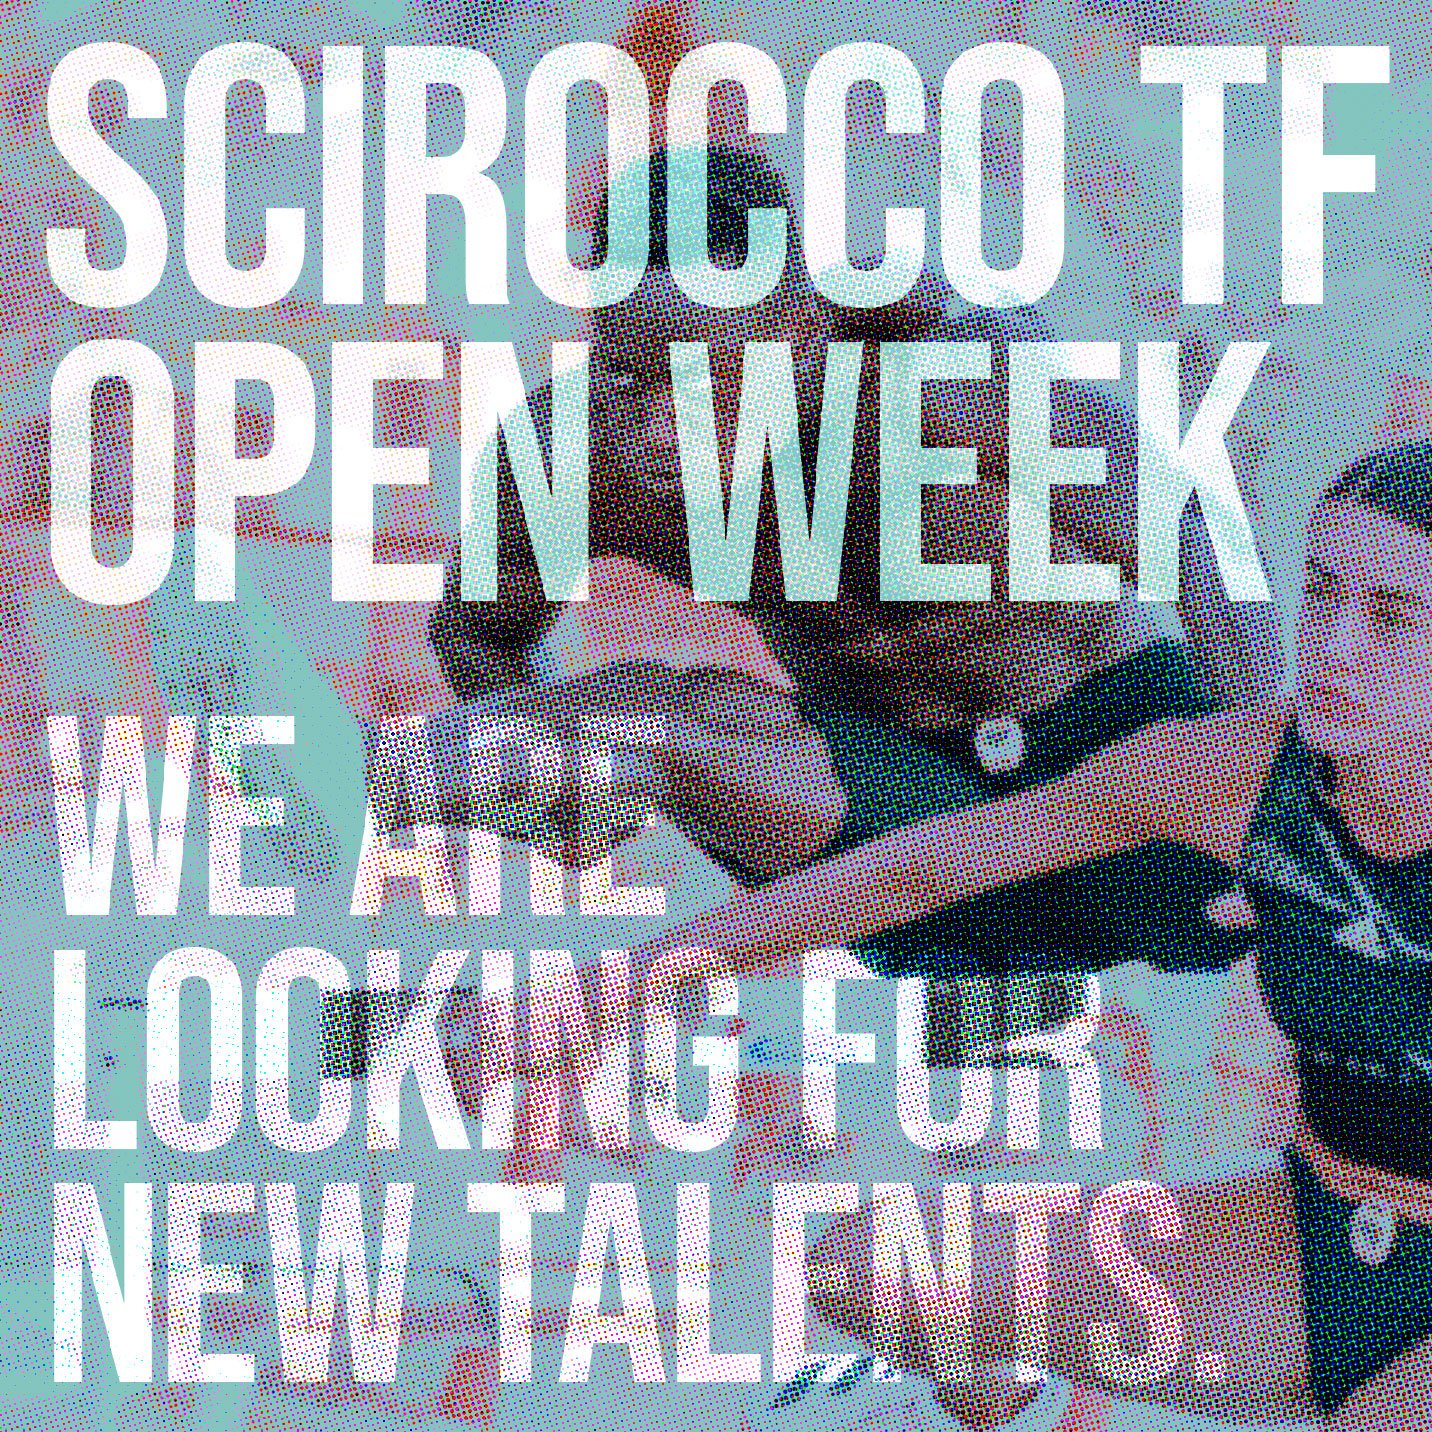 Scirocco-TF-Open-Week---We-are-looking-for-new-talents